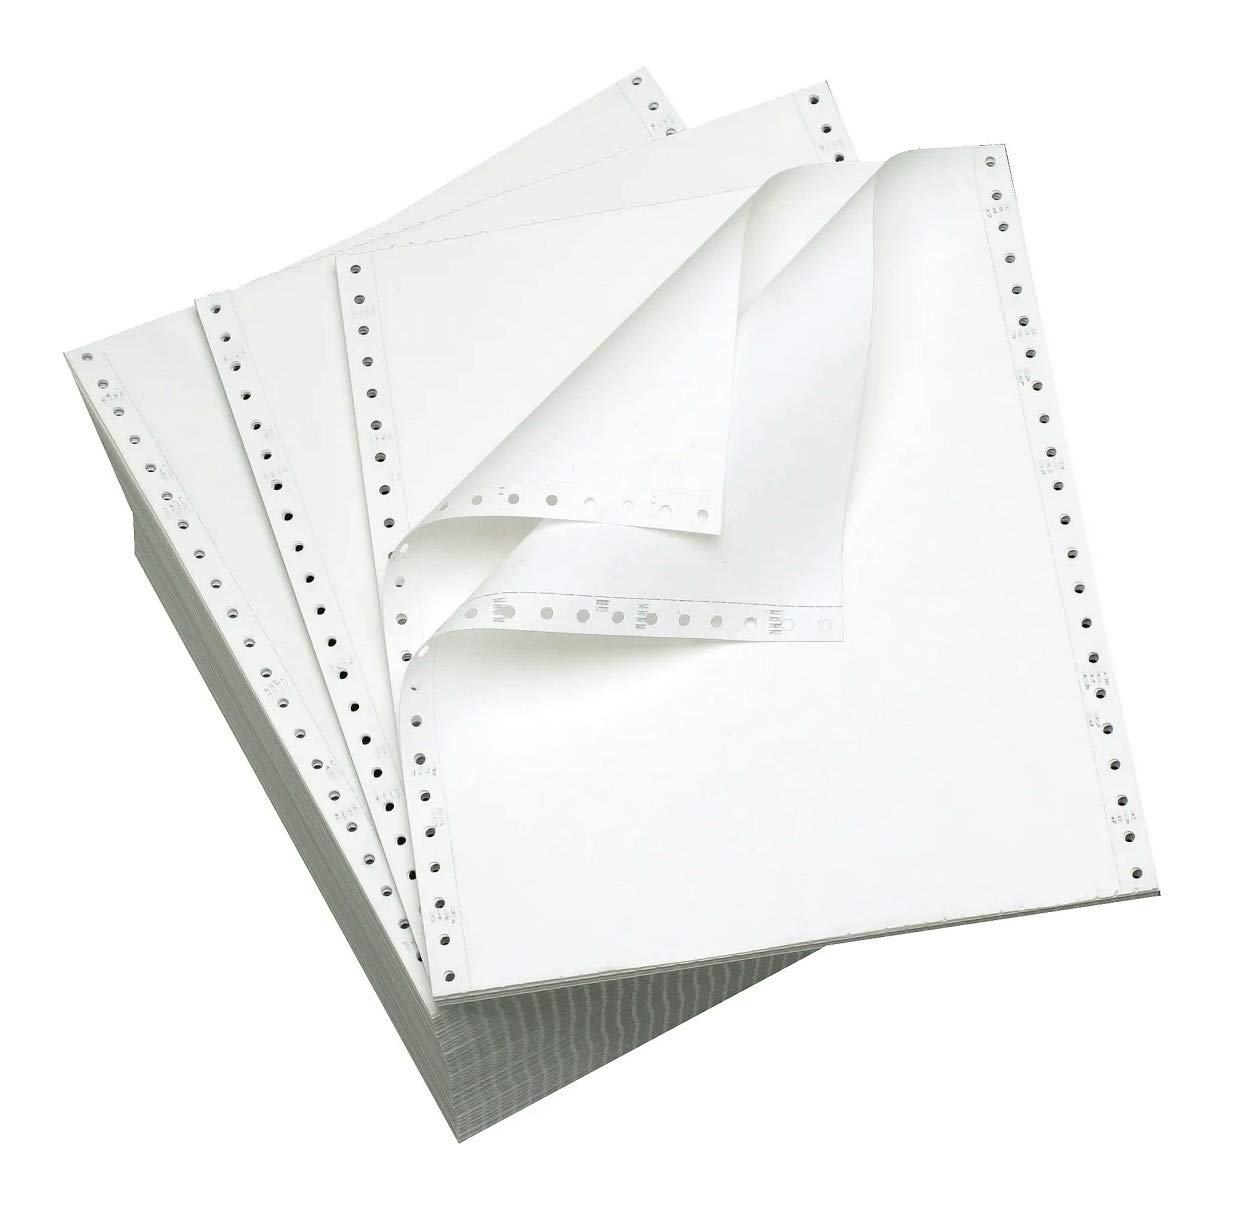 Office Depot® Brand Computer Paper, 2-Part, Standard Perforation, Carbonless, 9-1/2" x 11", 15 Lb, White, Carton Of 1400 Forms Item # 880219